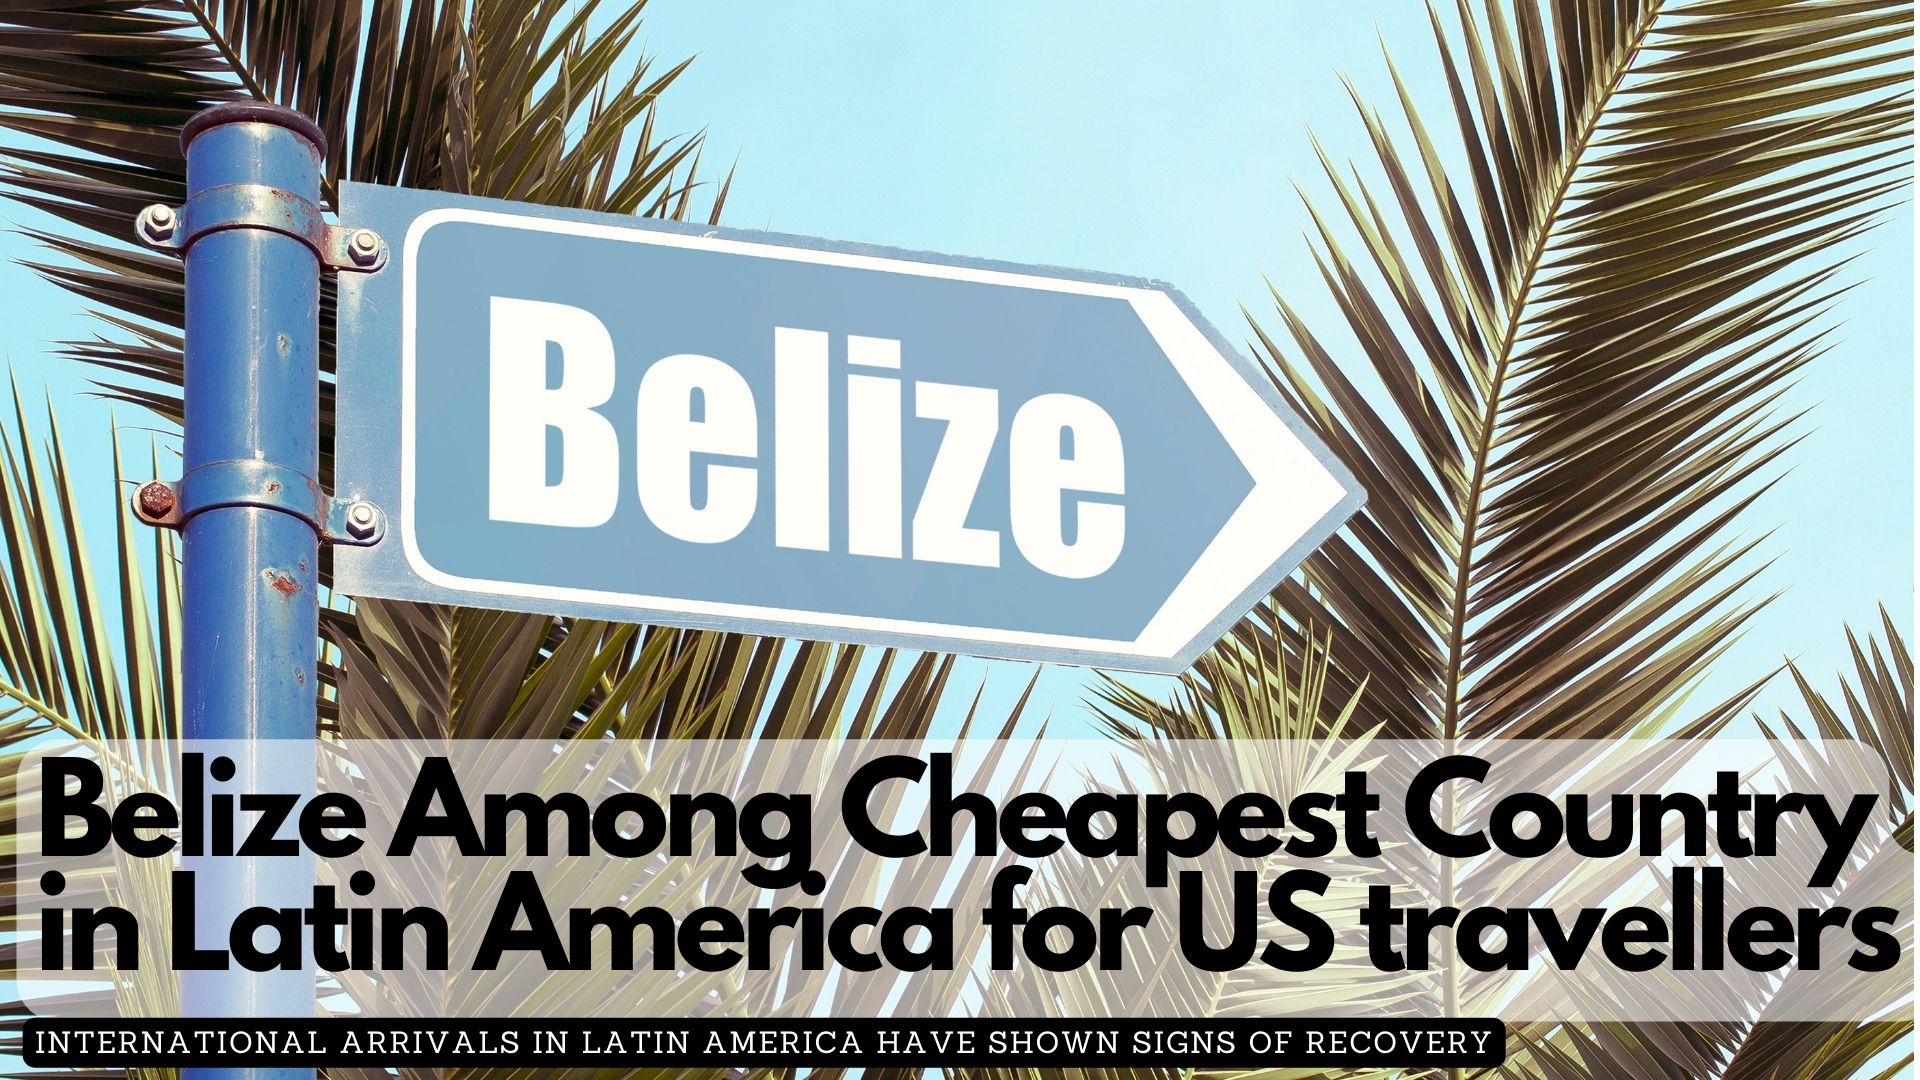 Belize Among Cheapest Country in Latin America for US travellers 